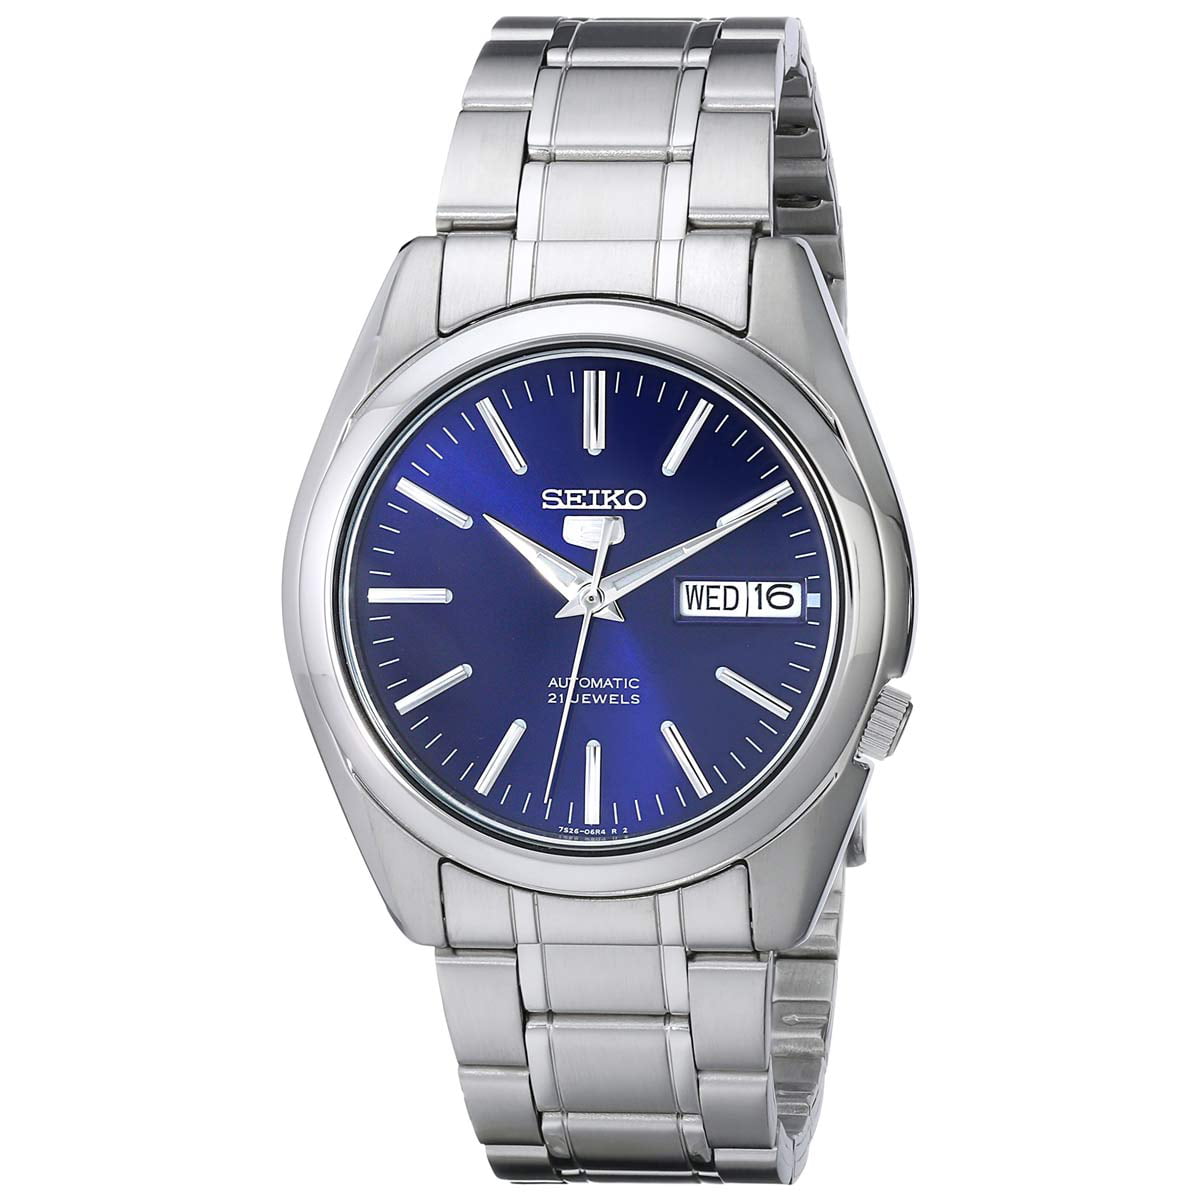 Seiko Men's SNKL43 5 Automatic Stainless Steel Bracelet Blue Dial Watch ...